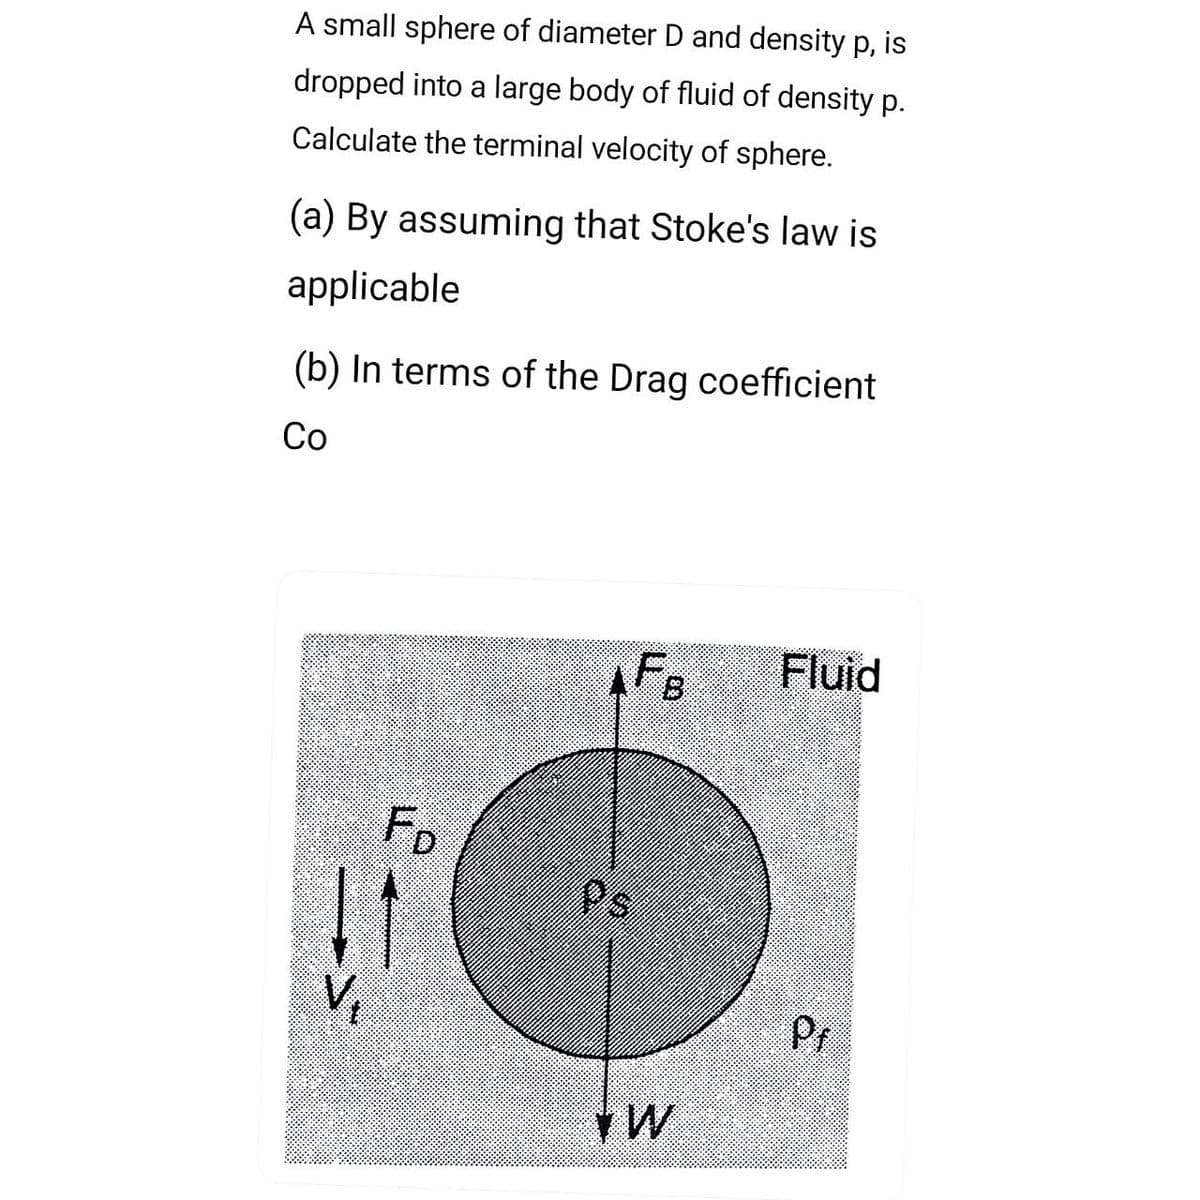 A small sphere of diameter D and density p, is
dropped into a large body of fluid of density p.
Calculate the terminal velocity of sphere.
(a) By assuming that Stoke's law is
applicable
(b) In terms of the Drag coefficient
Co
FD
AFB Fluid
Ps
W
Pf